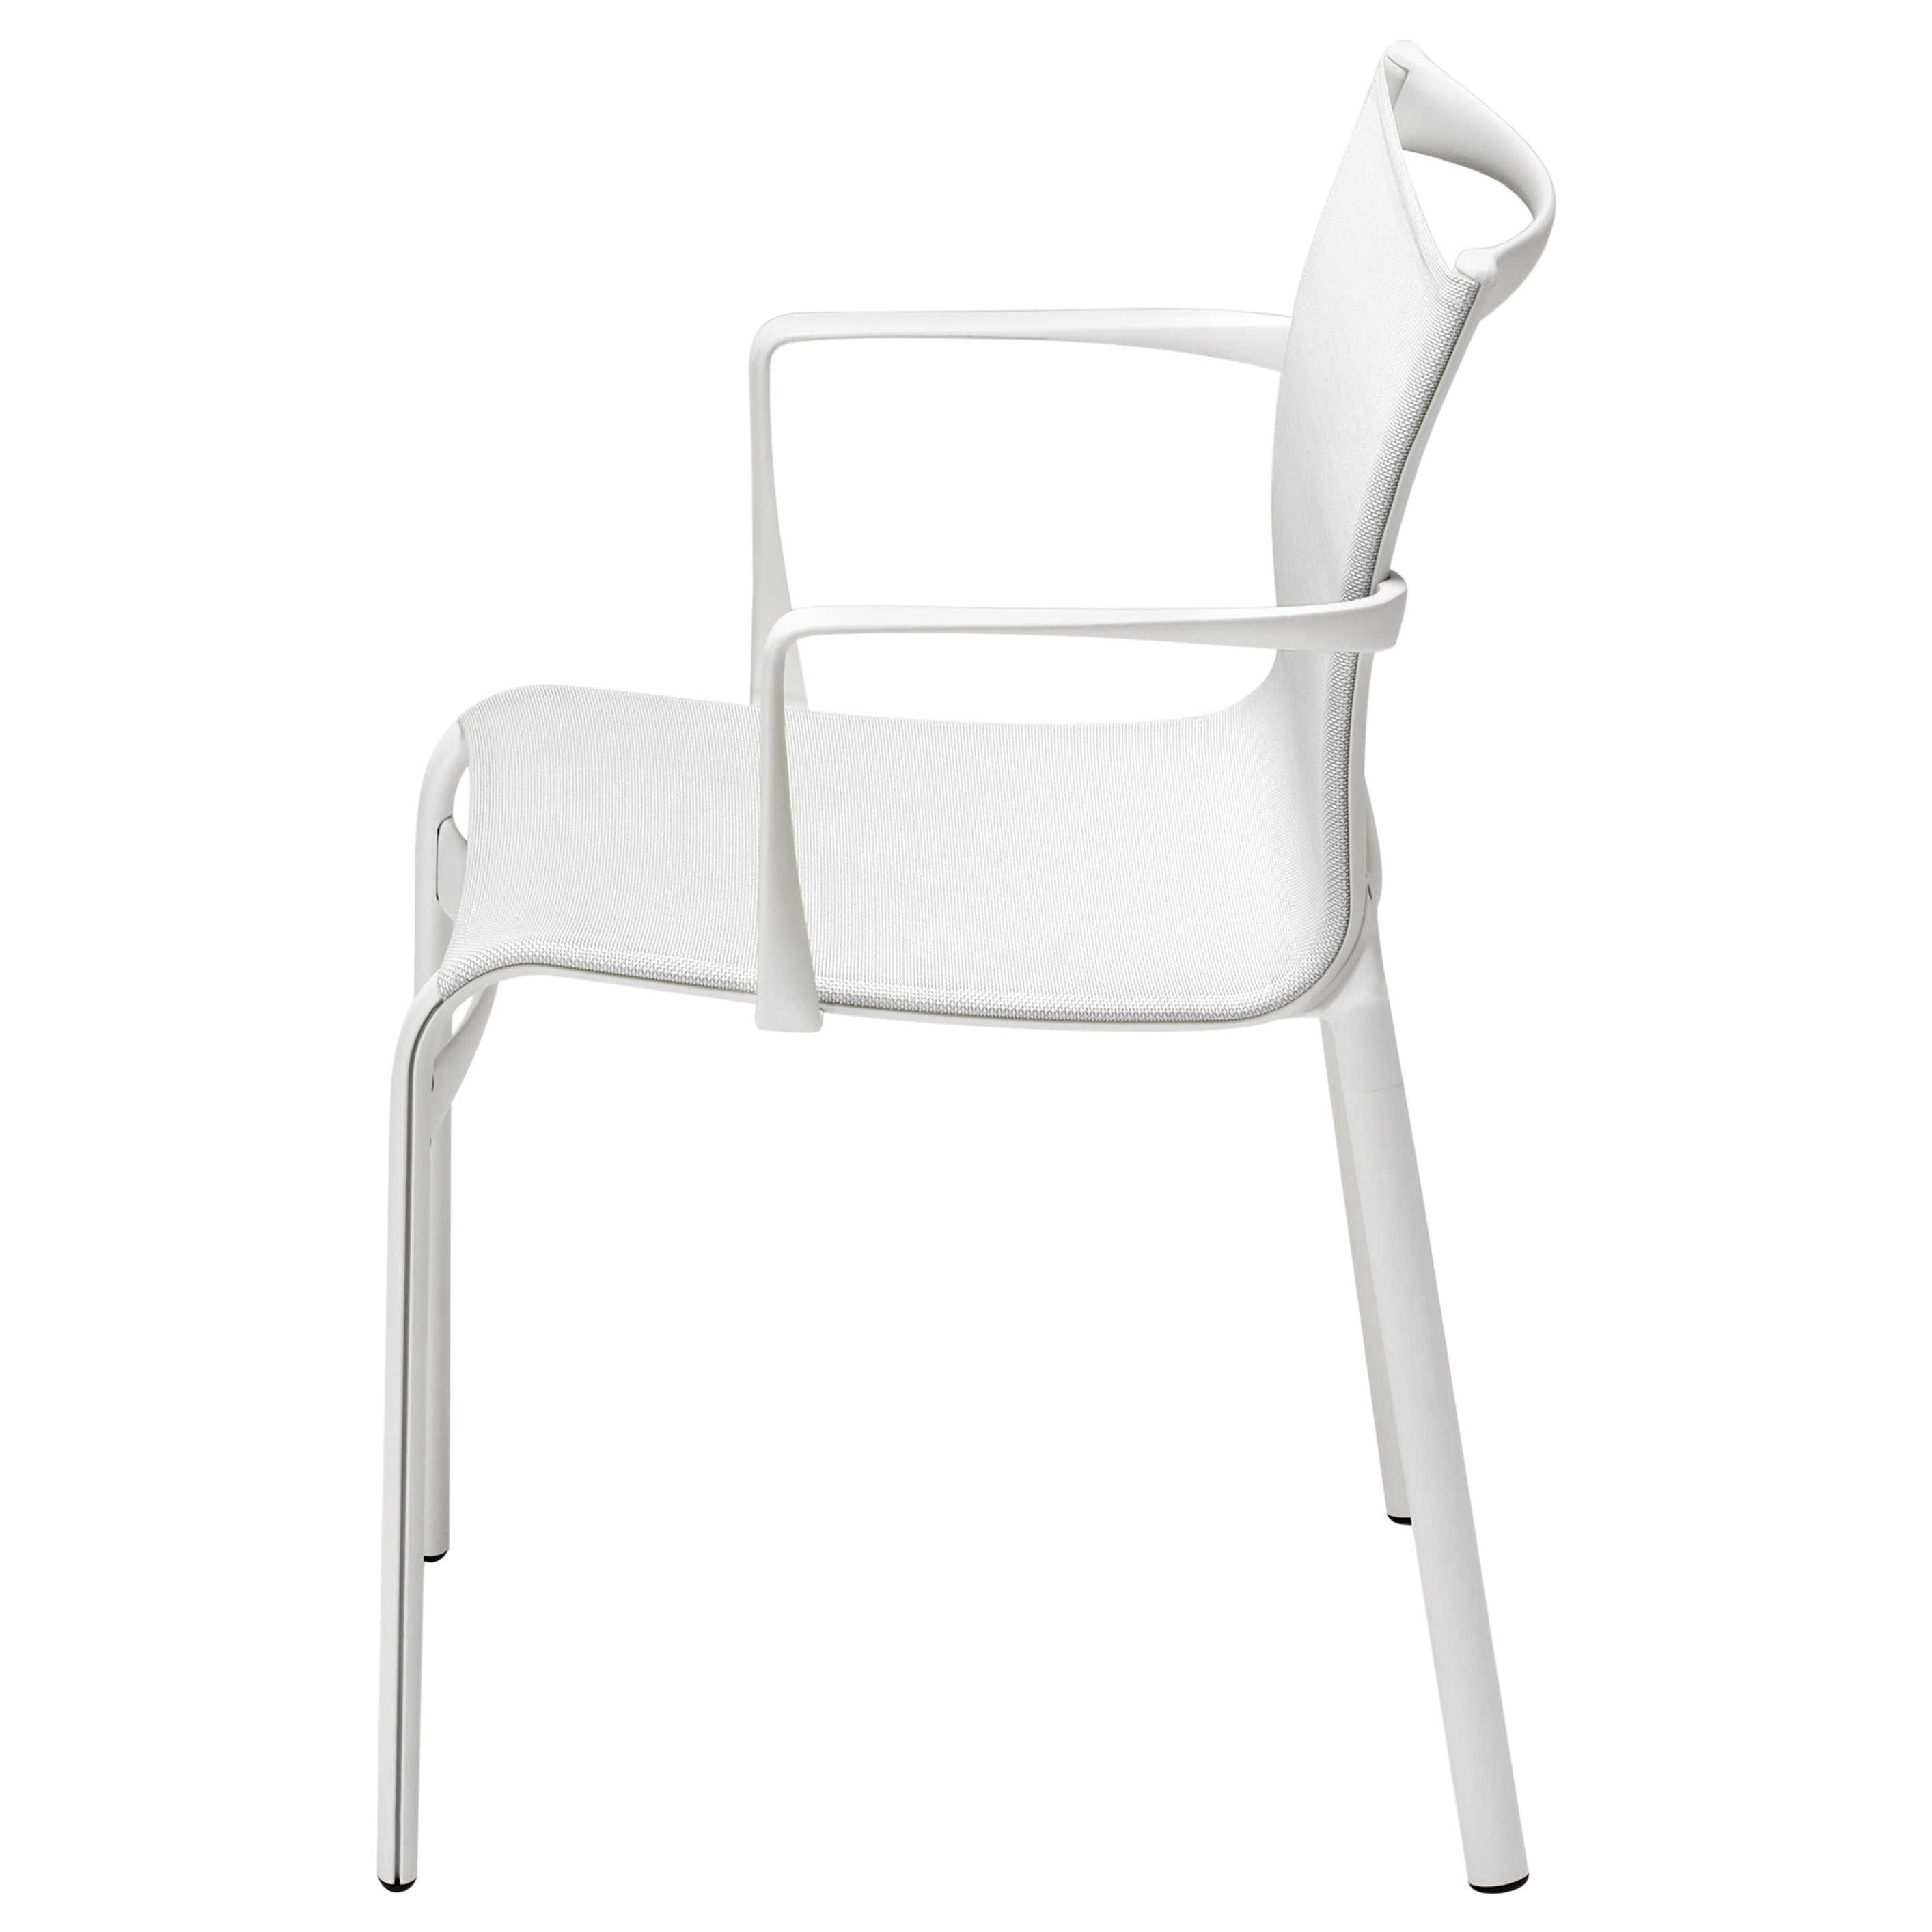 Alias Bigframe 44 Outdoor Armchair in White Mesh with Lacquered Aluminium Frame For Sale